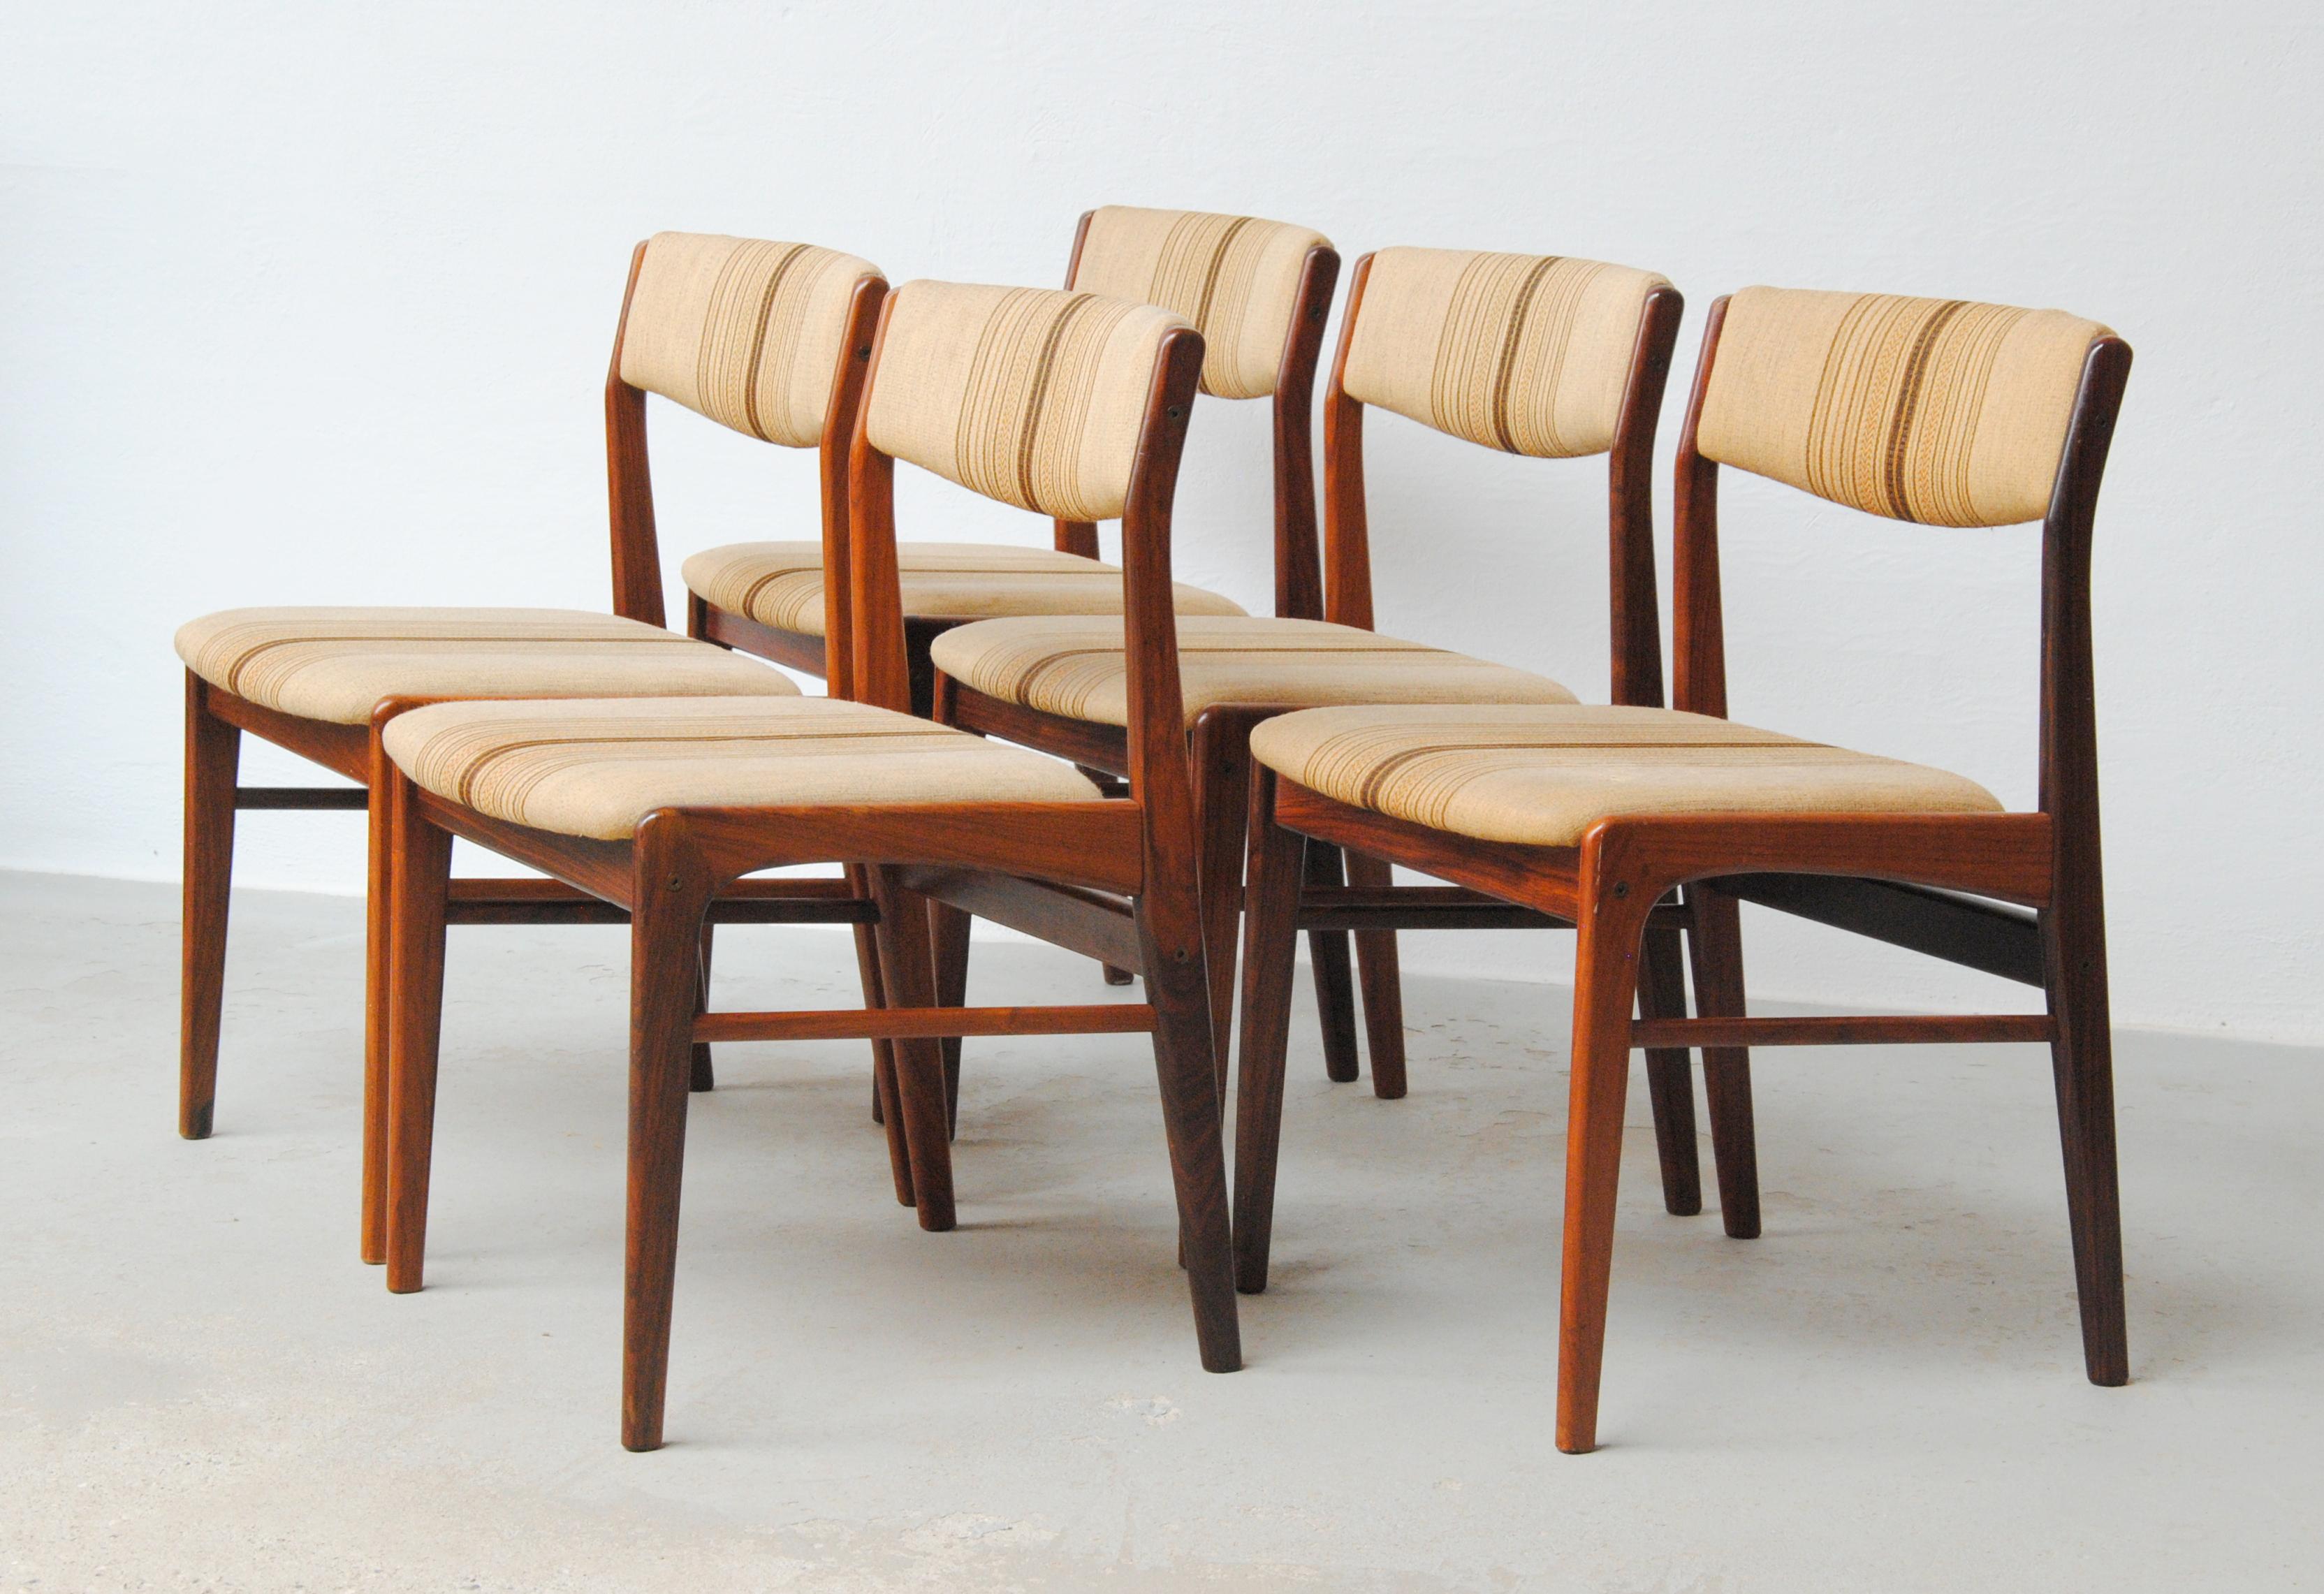 1970's Set of five restored rosewood dining chairs custom upholstery included.

The set of 5 rosewood dining chairs feature a slim minimalistic scandinavian design with small but elegant curves that give the chairs personality on top of good